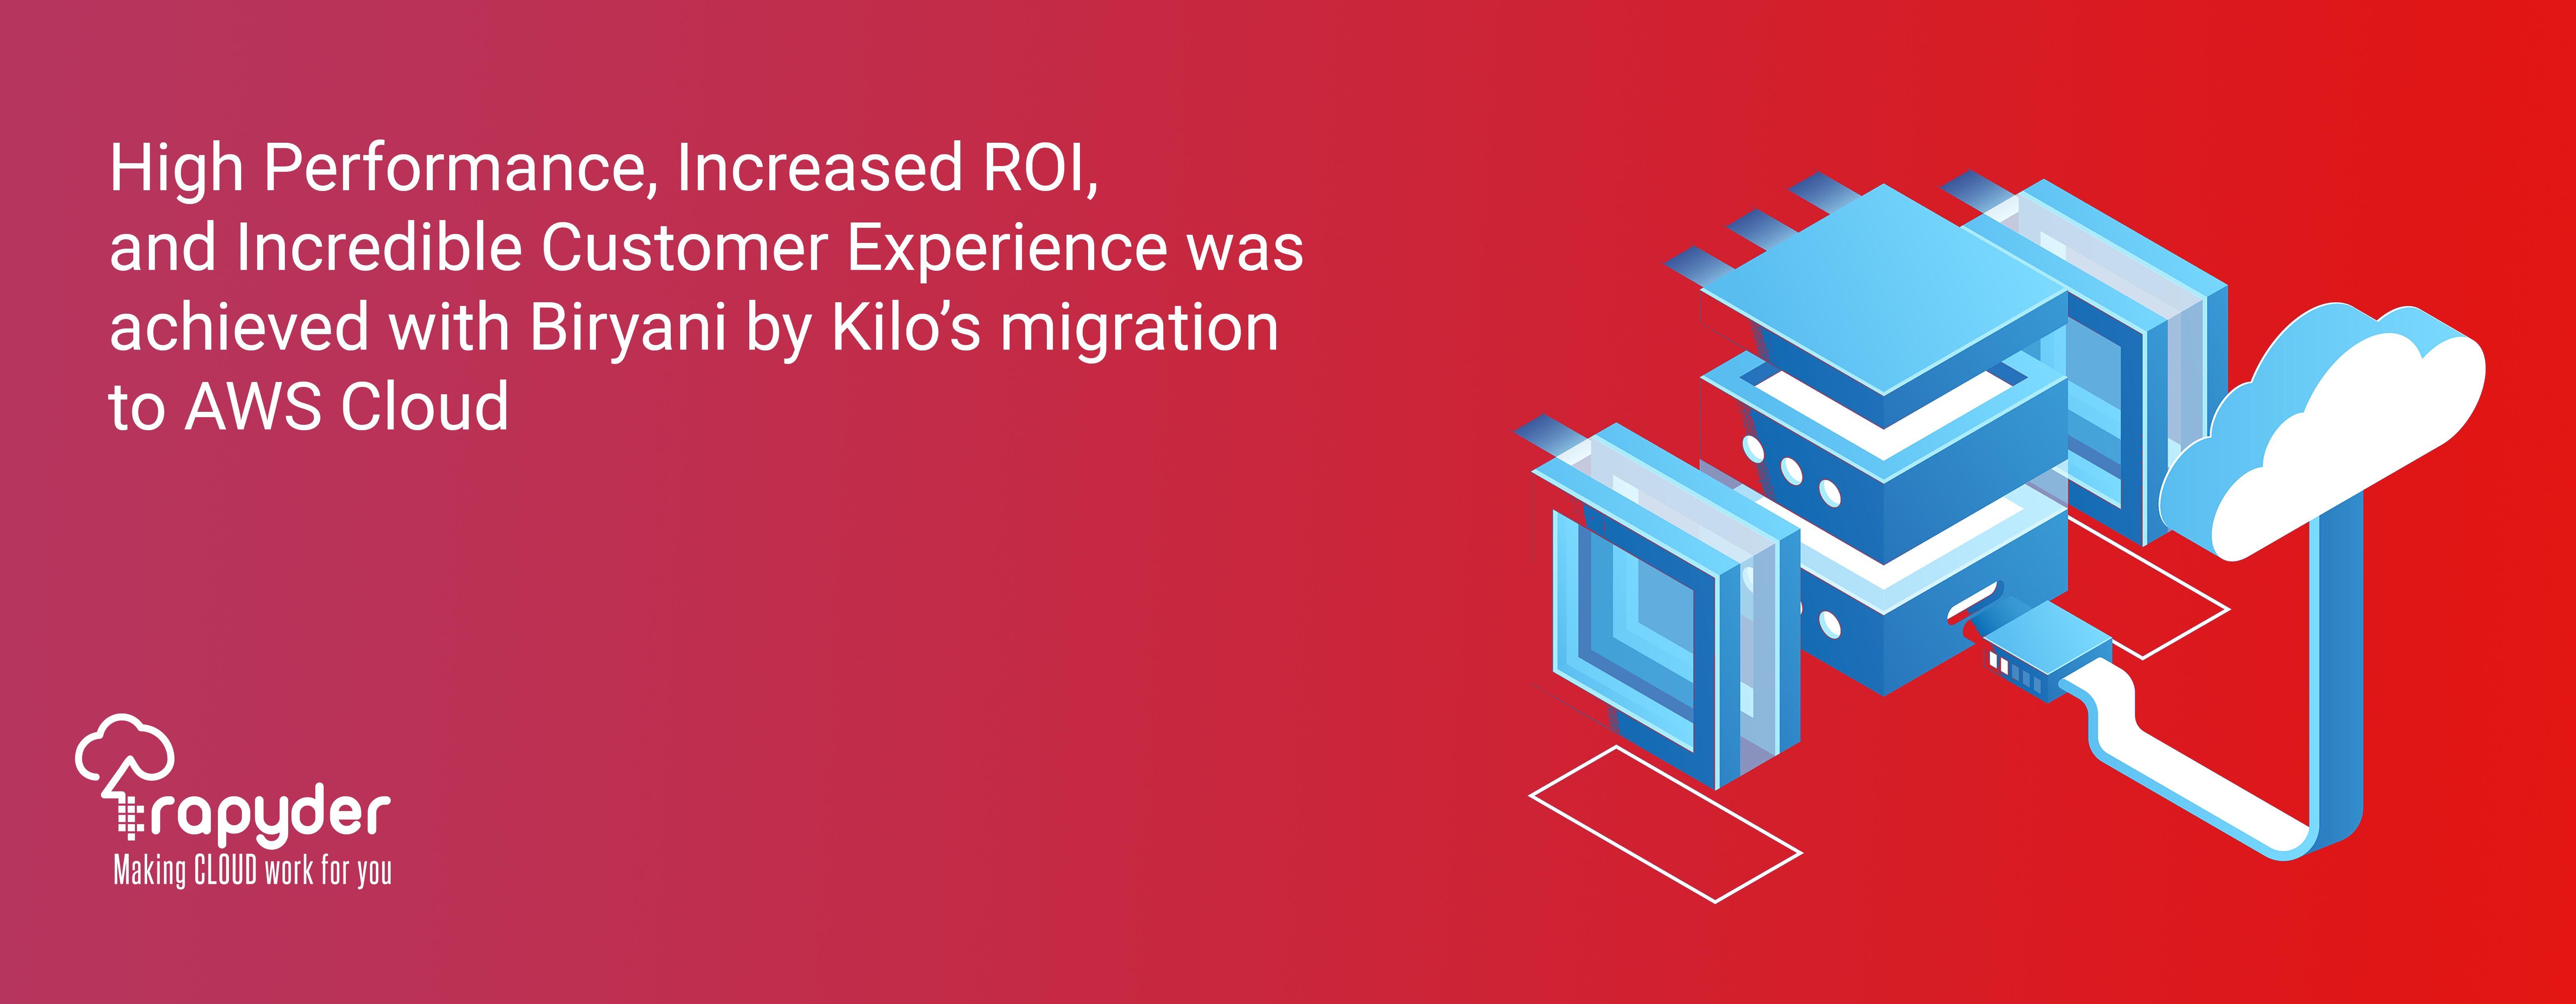 High Performance, increased ROI, and incredible Customer Experience was achieved with Biryani by Kilo’s migration to AWS Cloud.